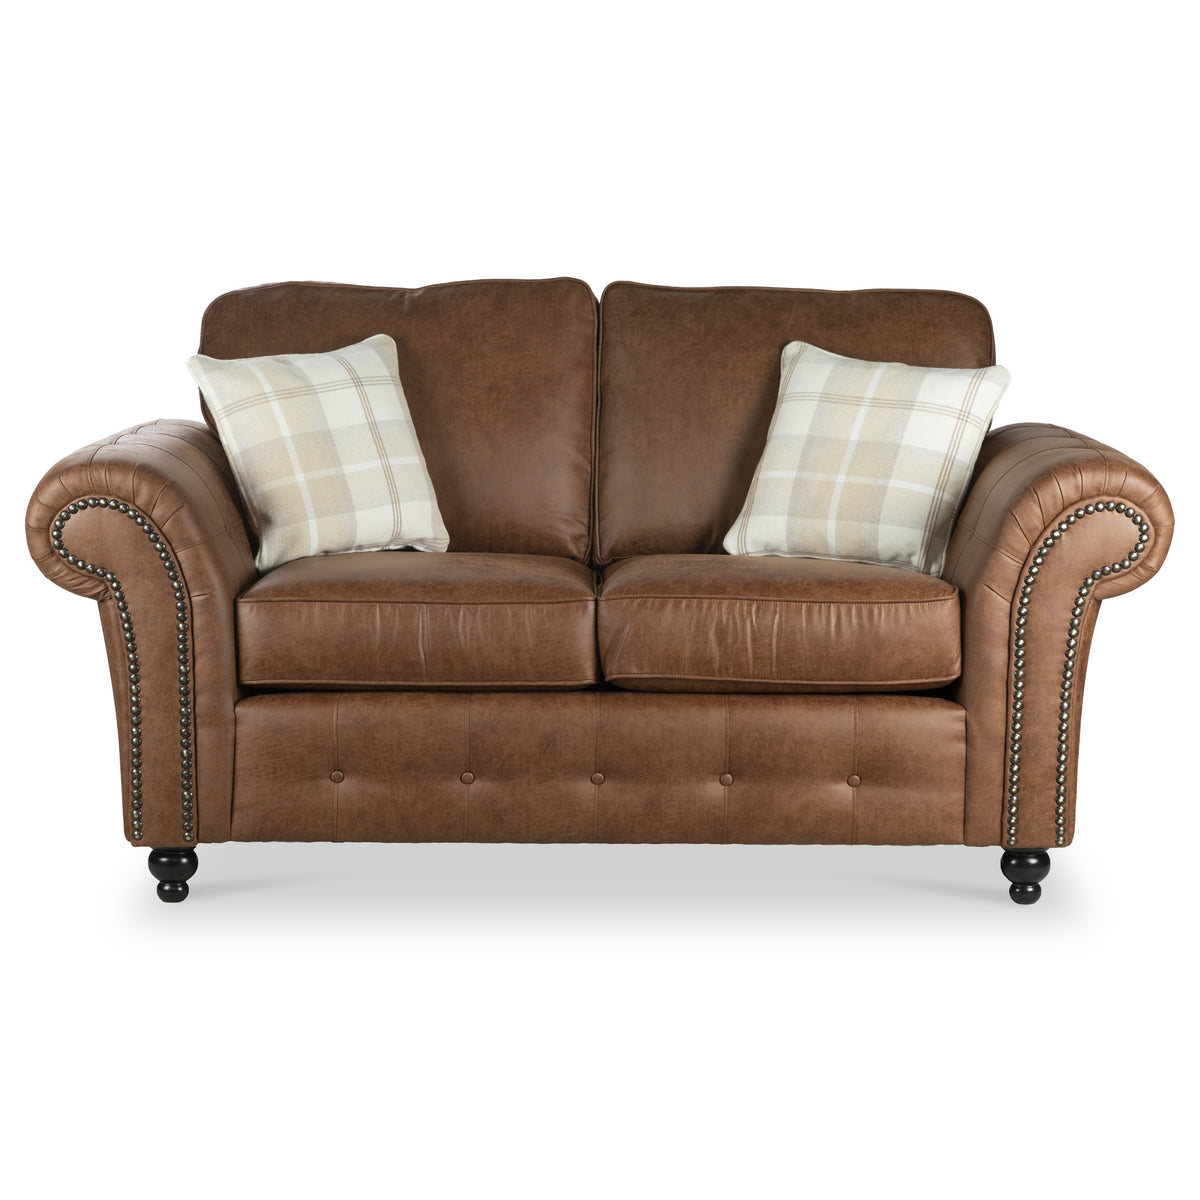 Edward Chocolate Faux Leather 2 Seater Couch